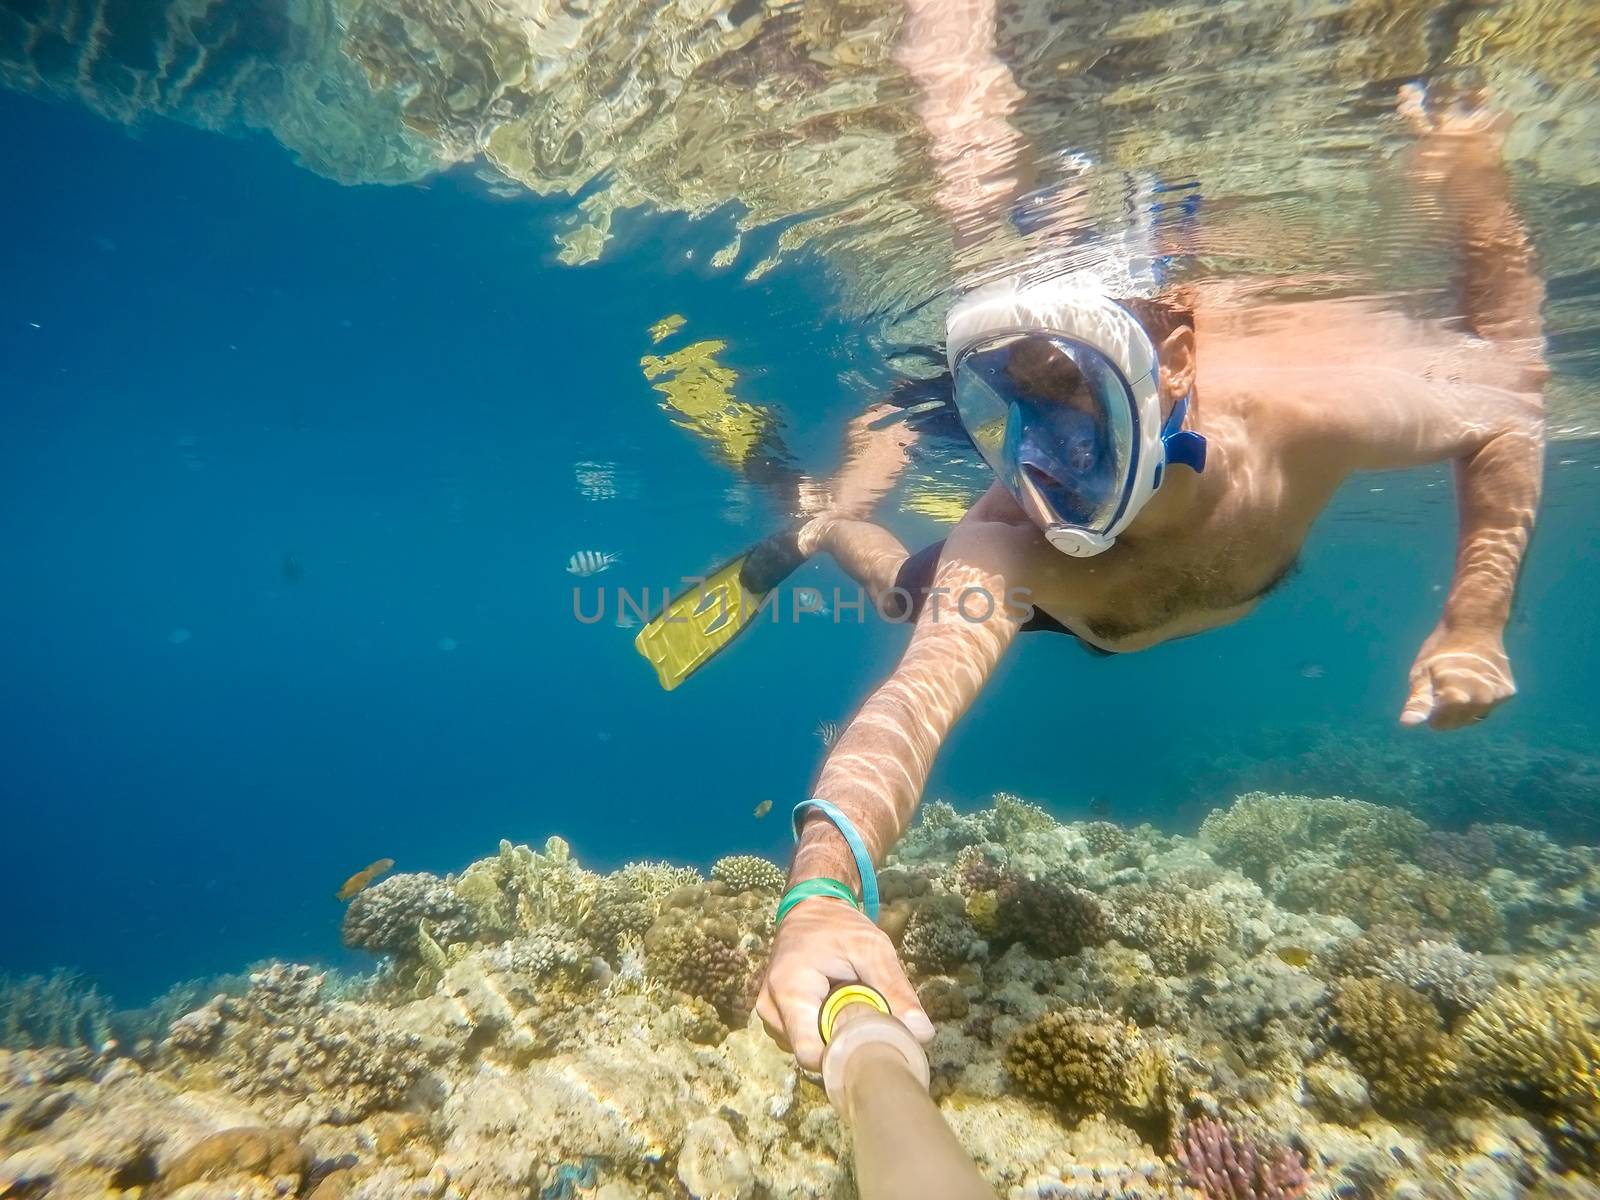 man snorkel in underwater exotic tropics paradise with fish and coral reef, beautiful view of tropical sea. Marsa alam, Egypt. Summer holiday vacation concept